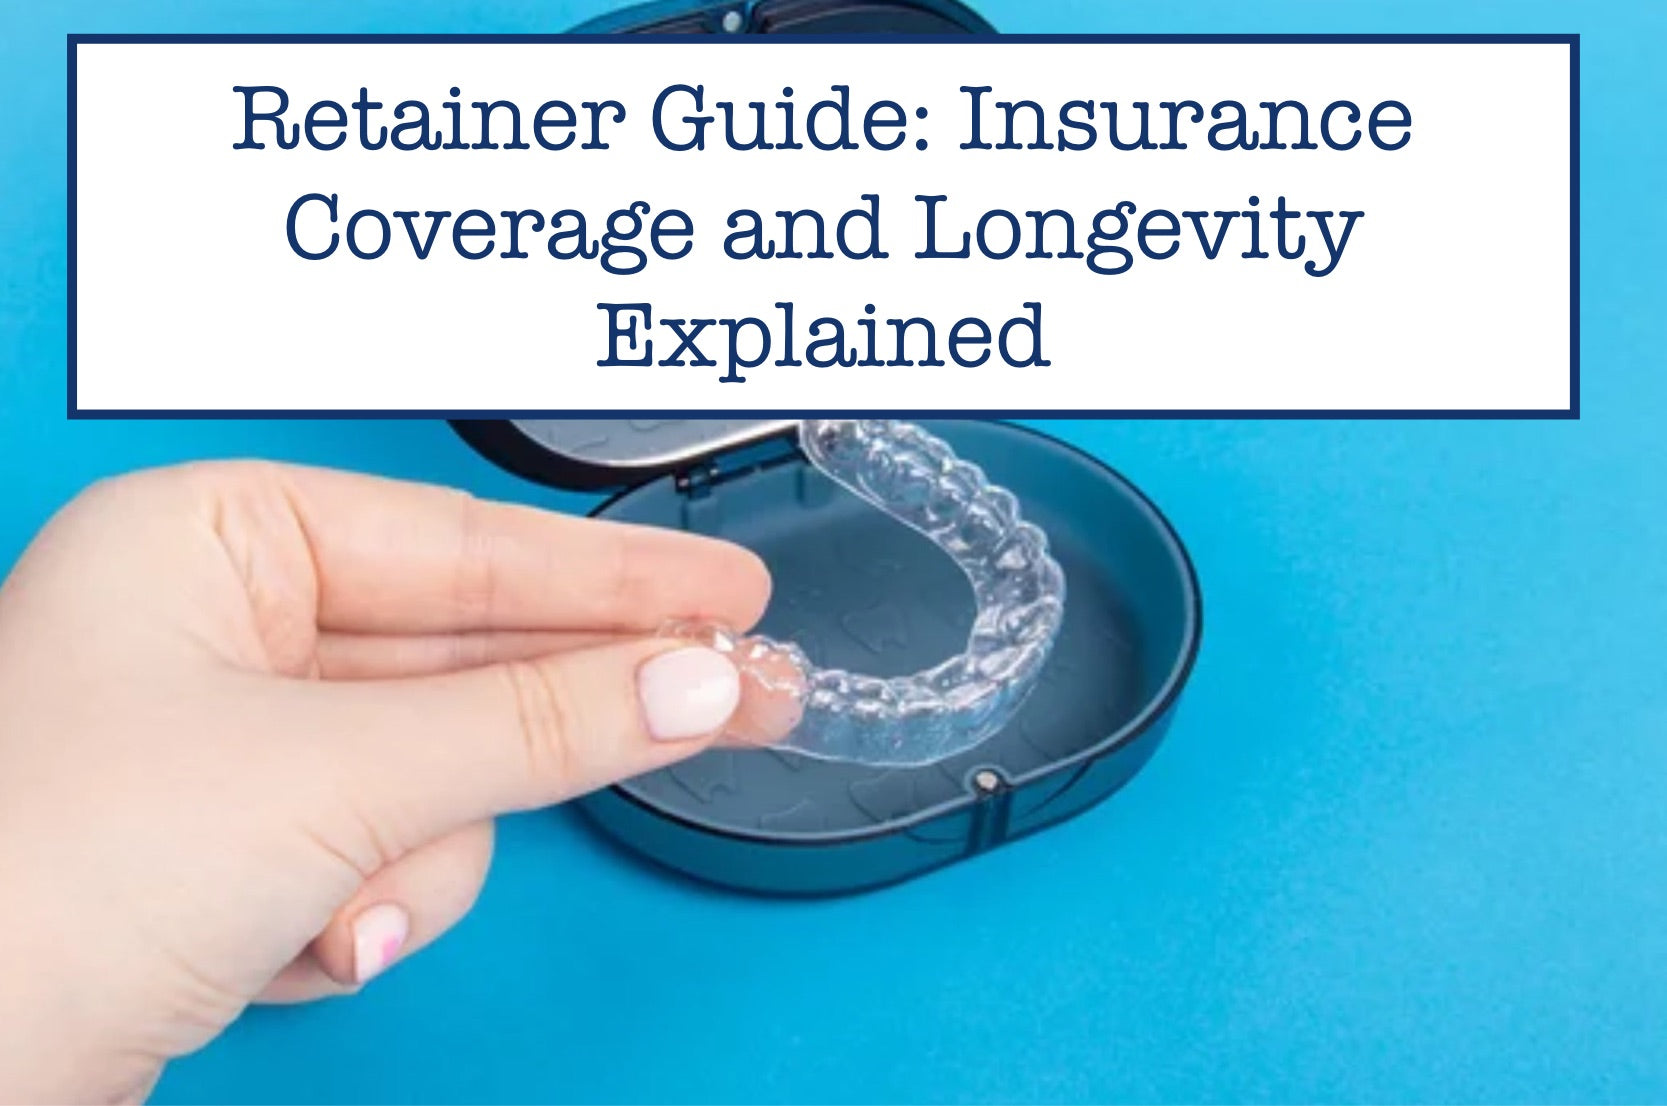 Retainer Guide: Insurance Coverage and Longevity Explained